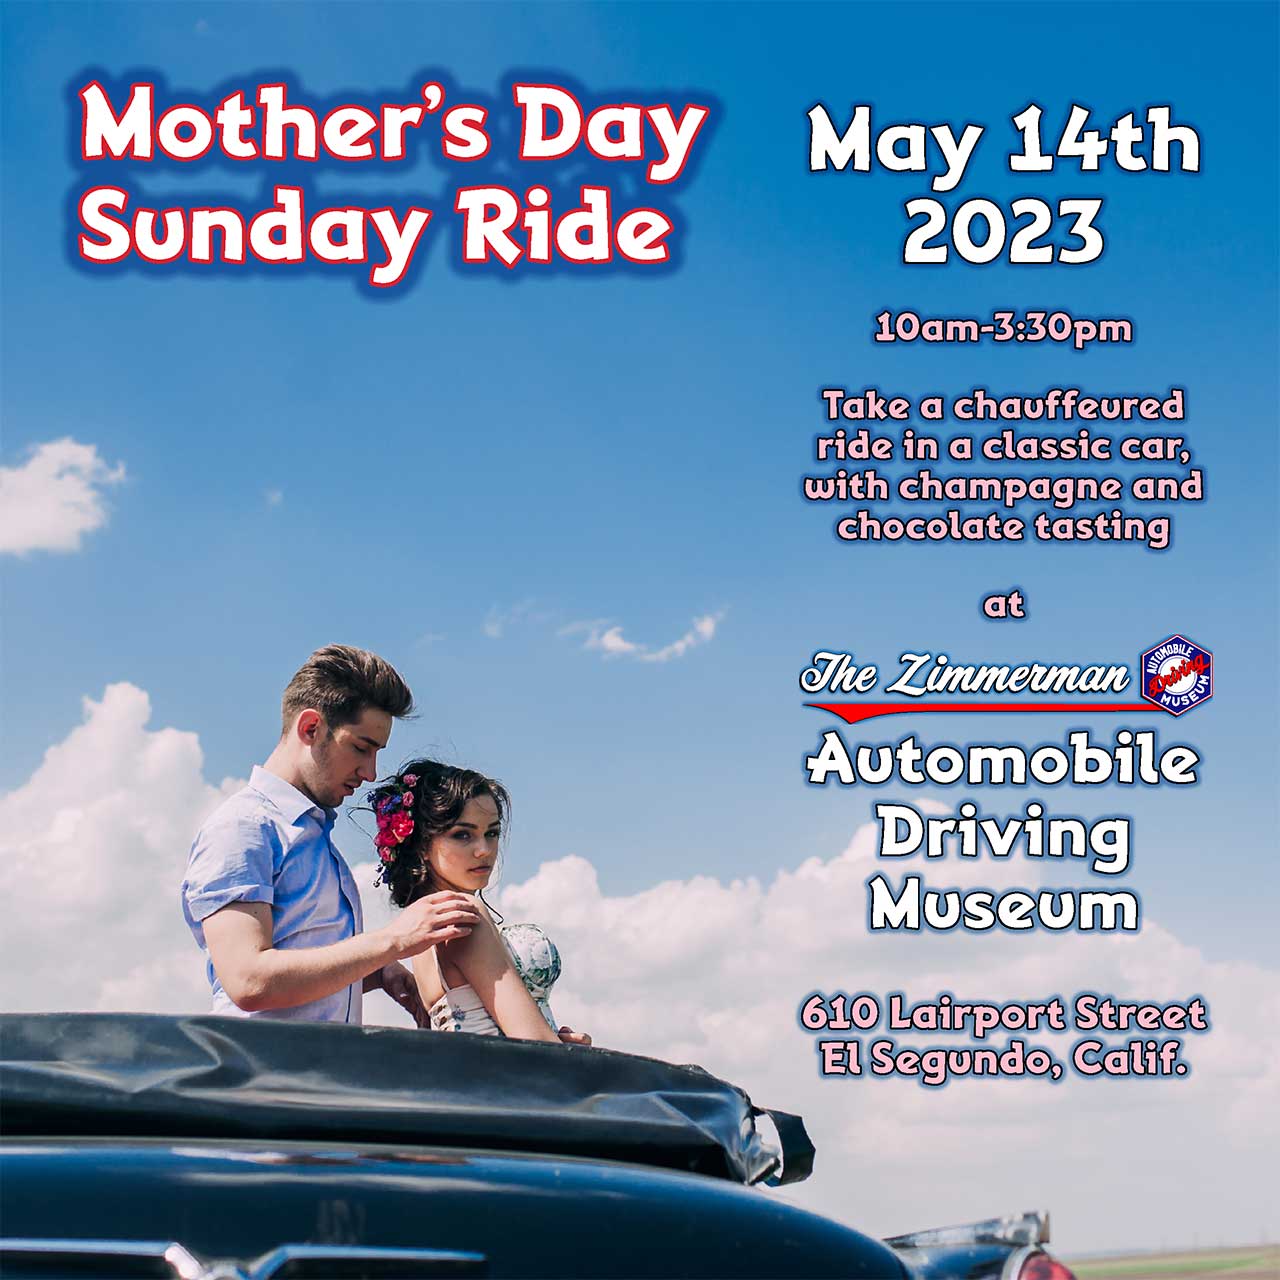 Mother's Day Sunday Ride May 14, 2023